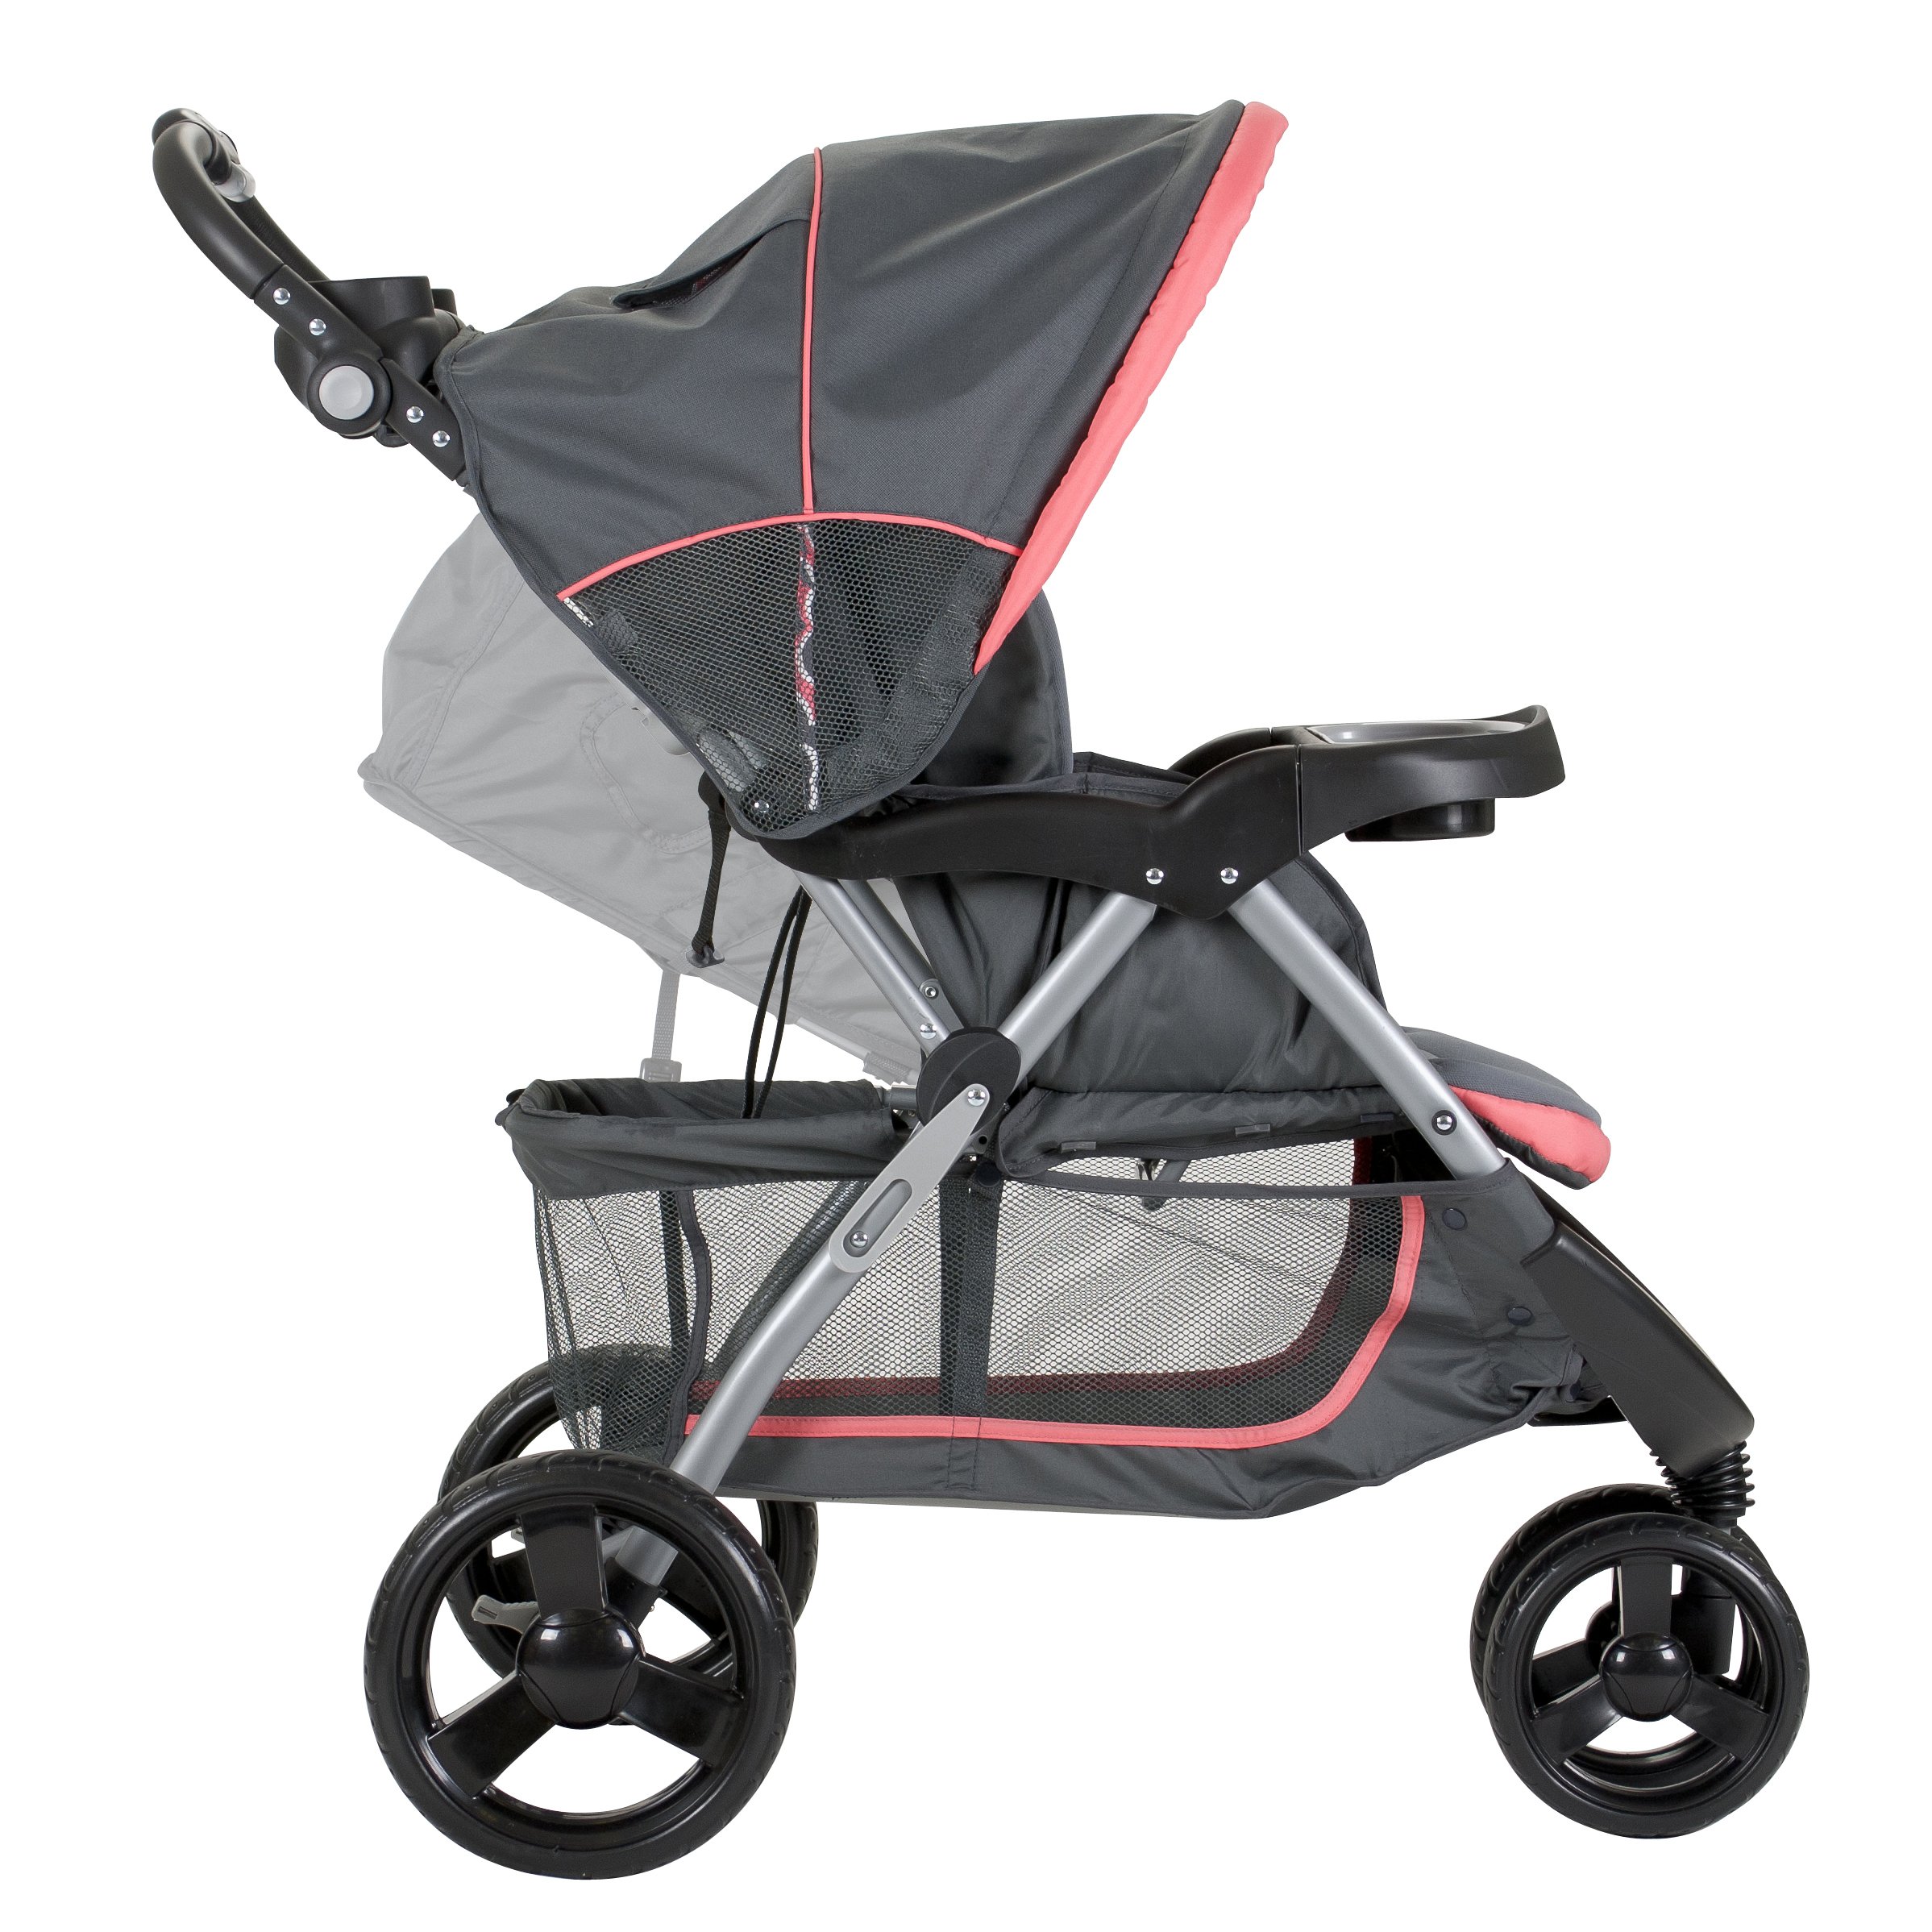 Baby Trend Nexton Travel System, Coral Floral